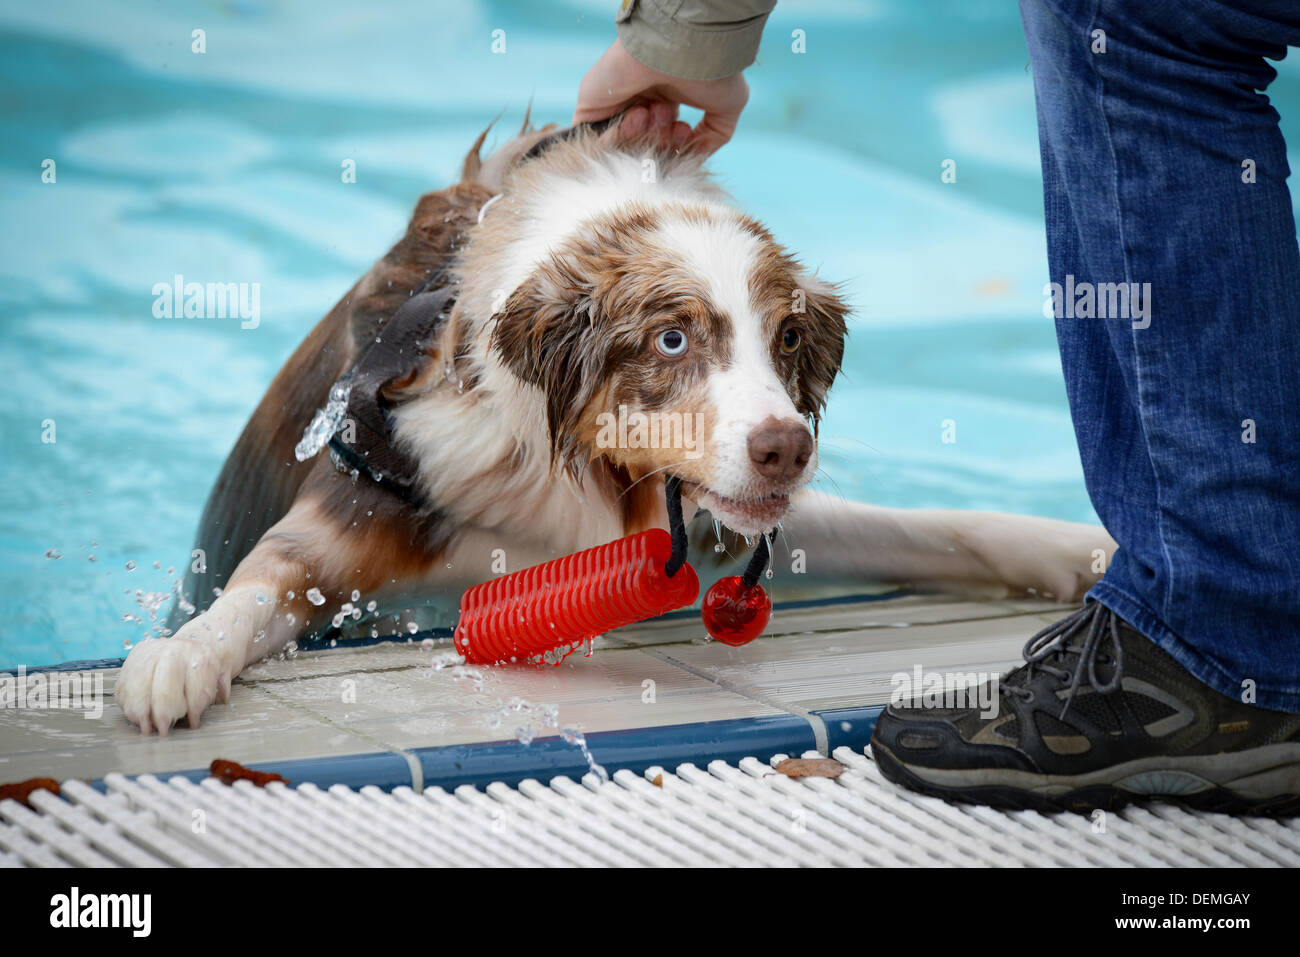 Bamberg, Germany. 21st Sep, 2013. An owner helps his dog out of a pool during the Dog Bathing Day at Stadionbad pool in Bamberg, Germany, 21 September 2013. Municipal works opened their pools exclusively for dogs at the end of the outdoor swimming pool season. Photo: DAVID EBENER/dpa/Alamy Live News Stock Photo